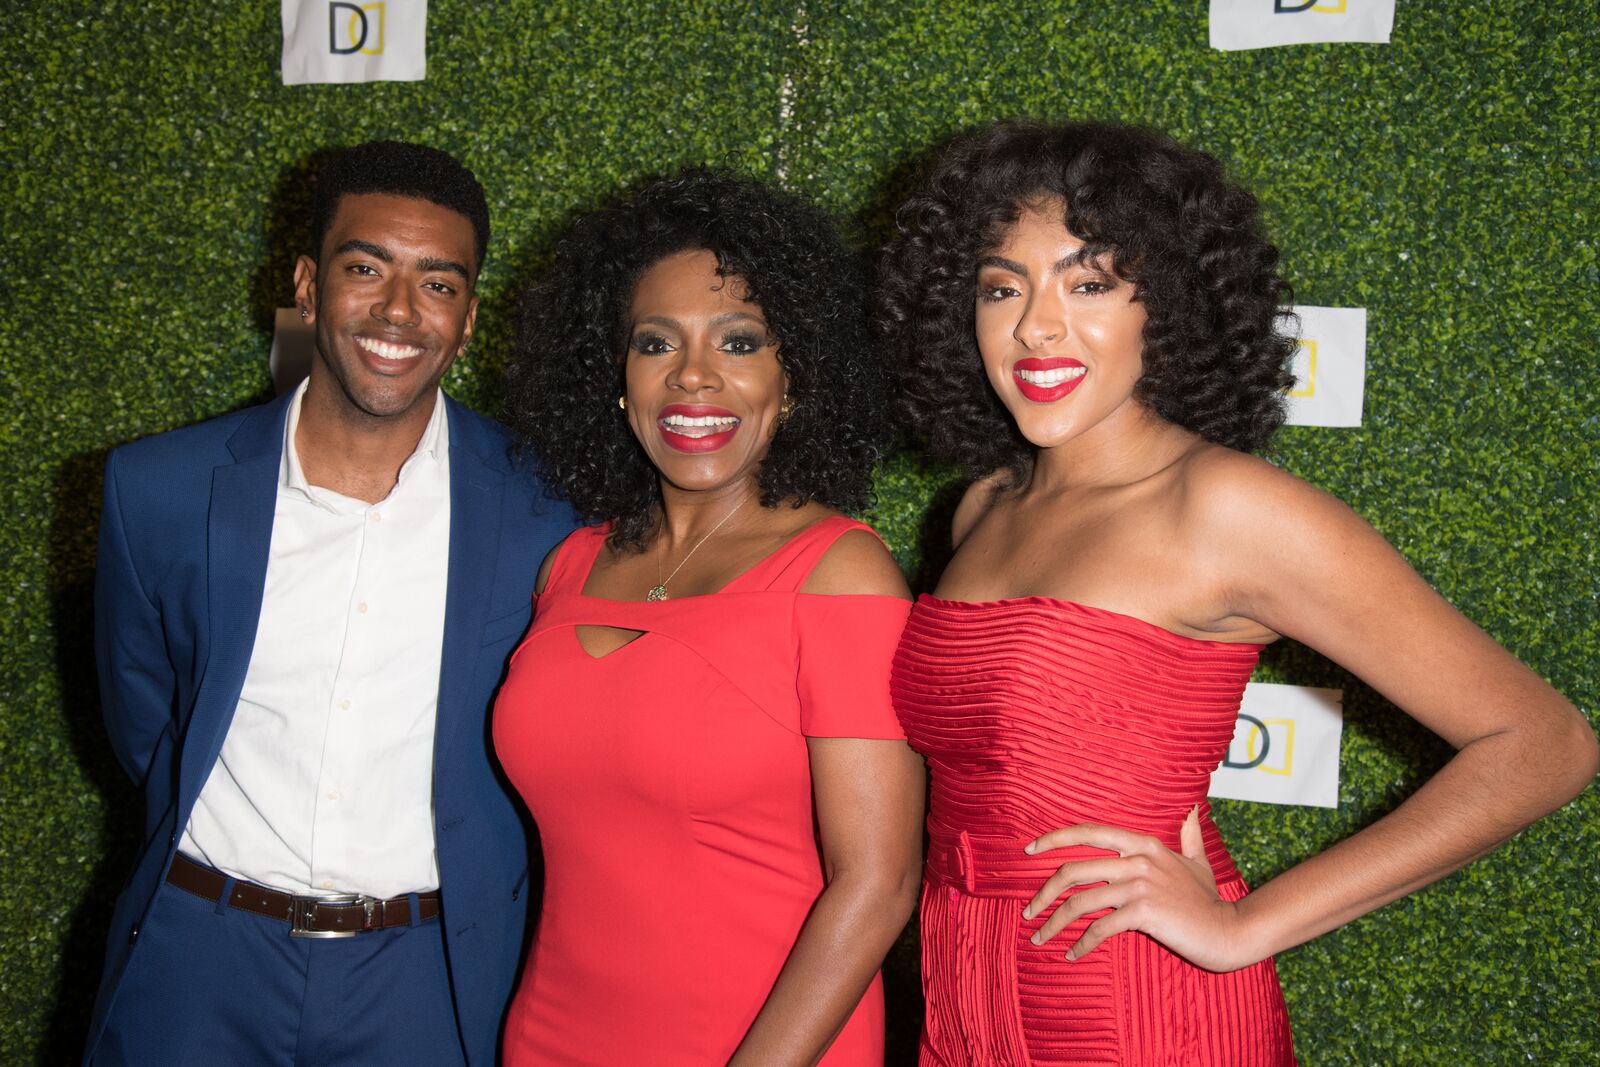 Etienne Maurice, Sheryl Lee Ralph and Ivy-Victoria Maurice attend Koshie Mills Host "The Diaspora Dialogues" International Women Of Power Luncheon at Marriott Hotel Marina Del Rey on March 2, 2018 | Photo: Getty Images